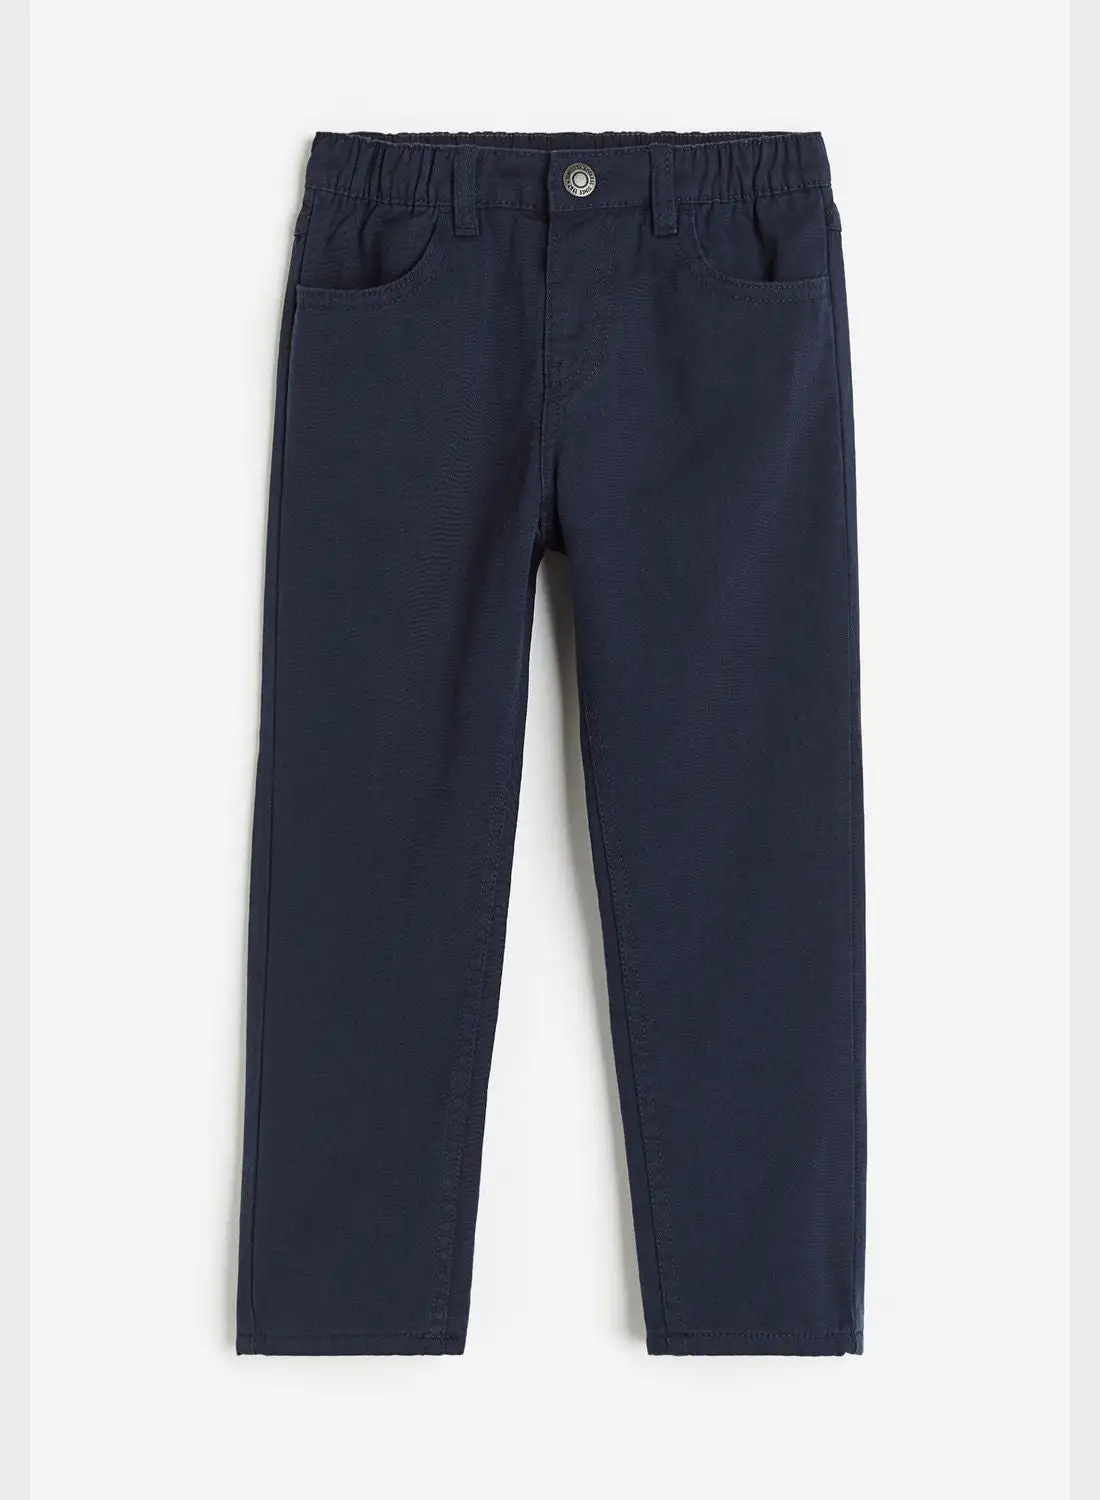 H&M Kids Lined Twill Pants